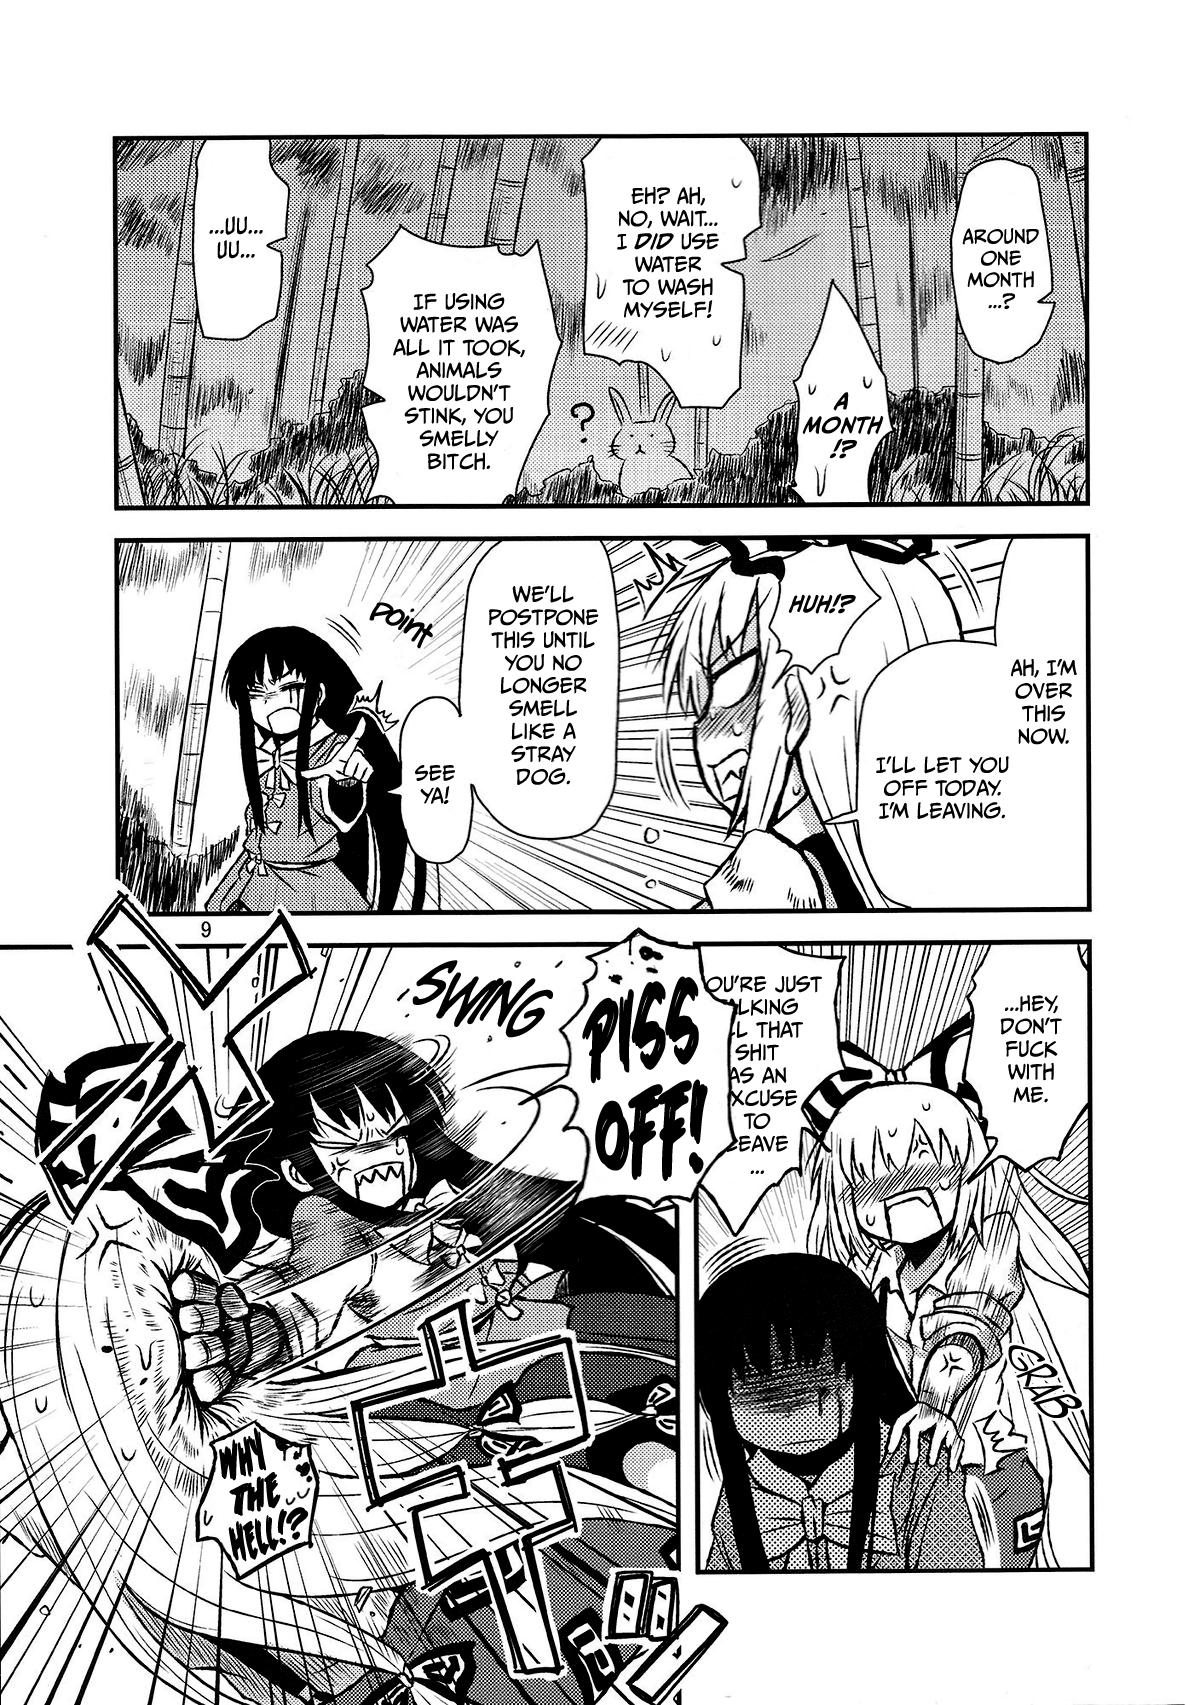 Infiel SURUDAKE San. - Touhou project Submission - Page 7